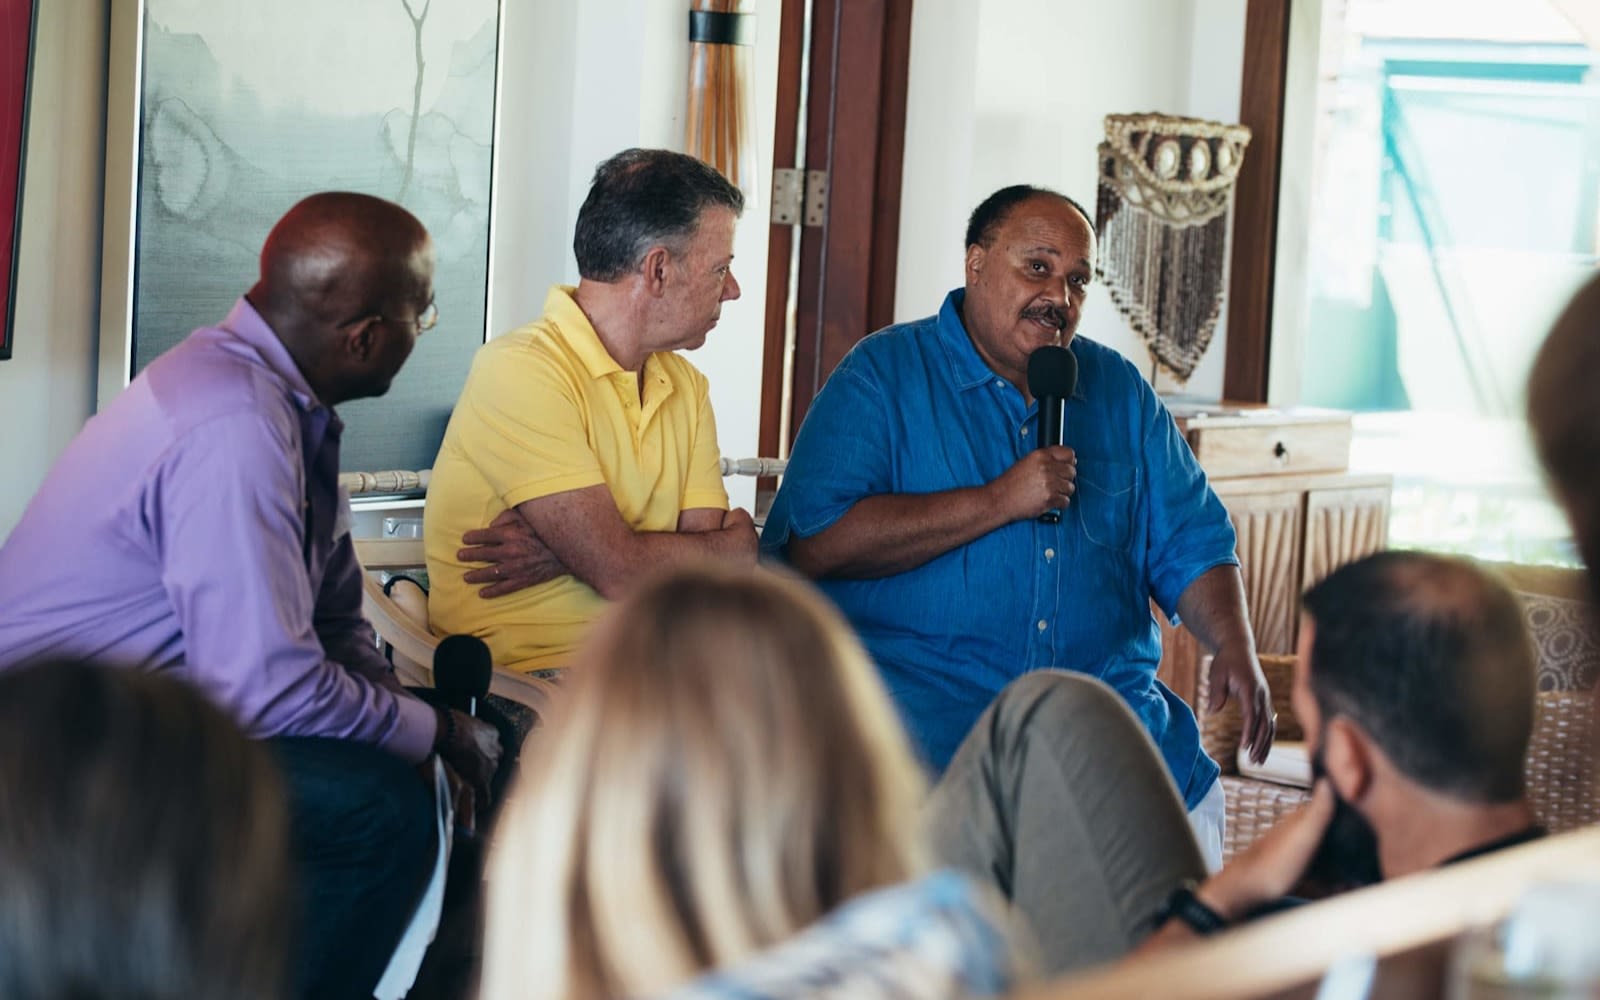 Martin Luther King III speaking at a Virgin Unite event on Necker Island